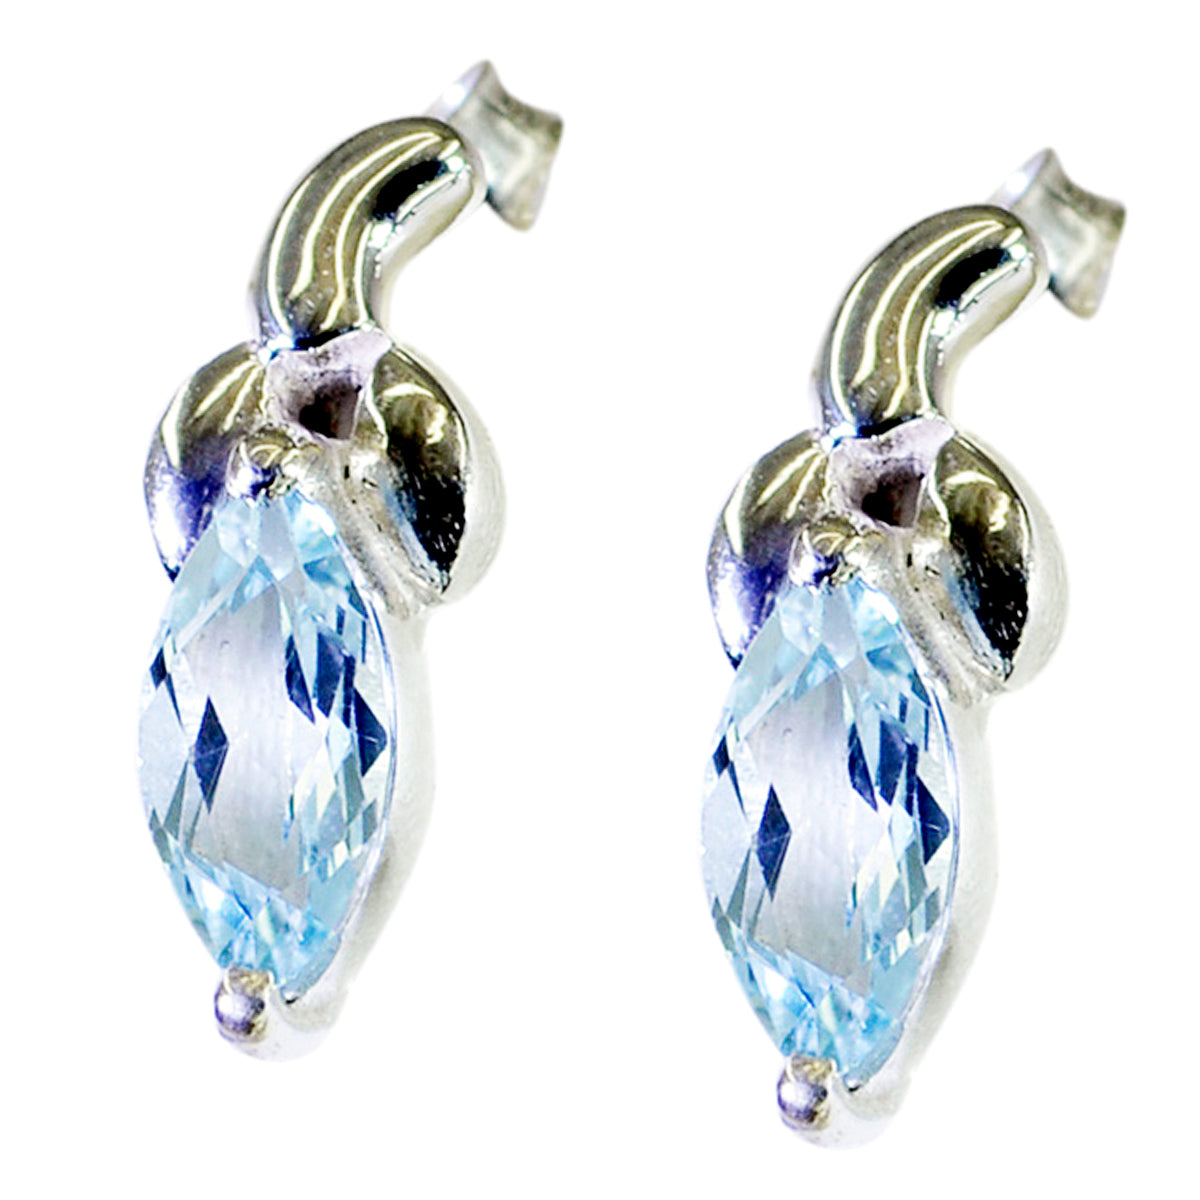 Riyo Genuine Gems Marquise Faceted Blue Topaz Silver Earring gift for college